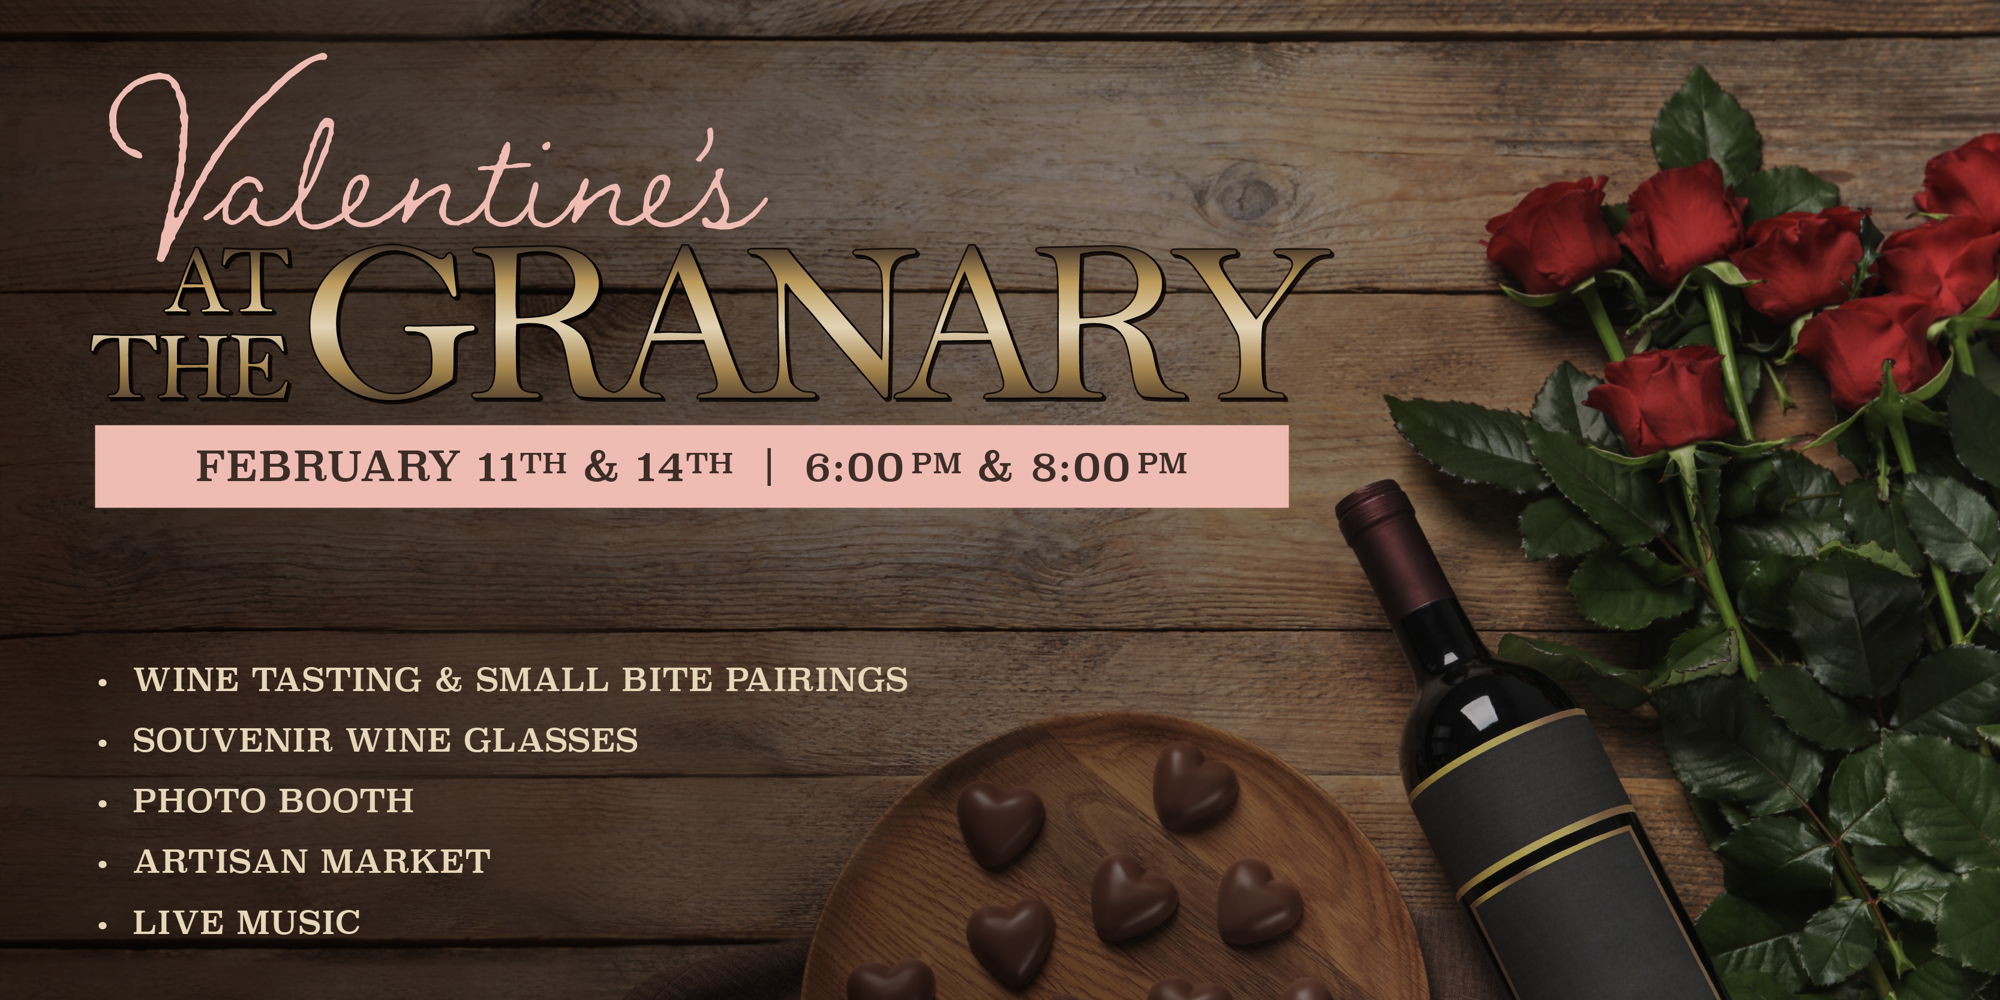 Valentine's At the Granary (February 11 and 14; 6 or 8pm Seating) promotional image